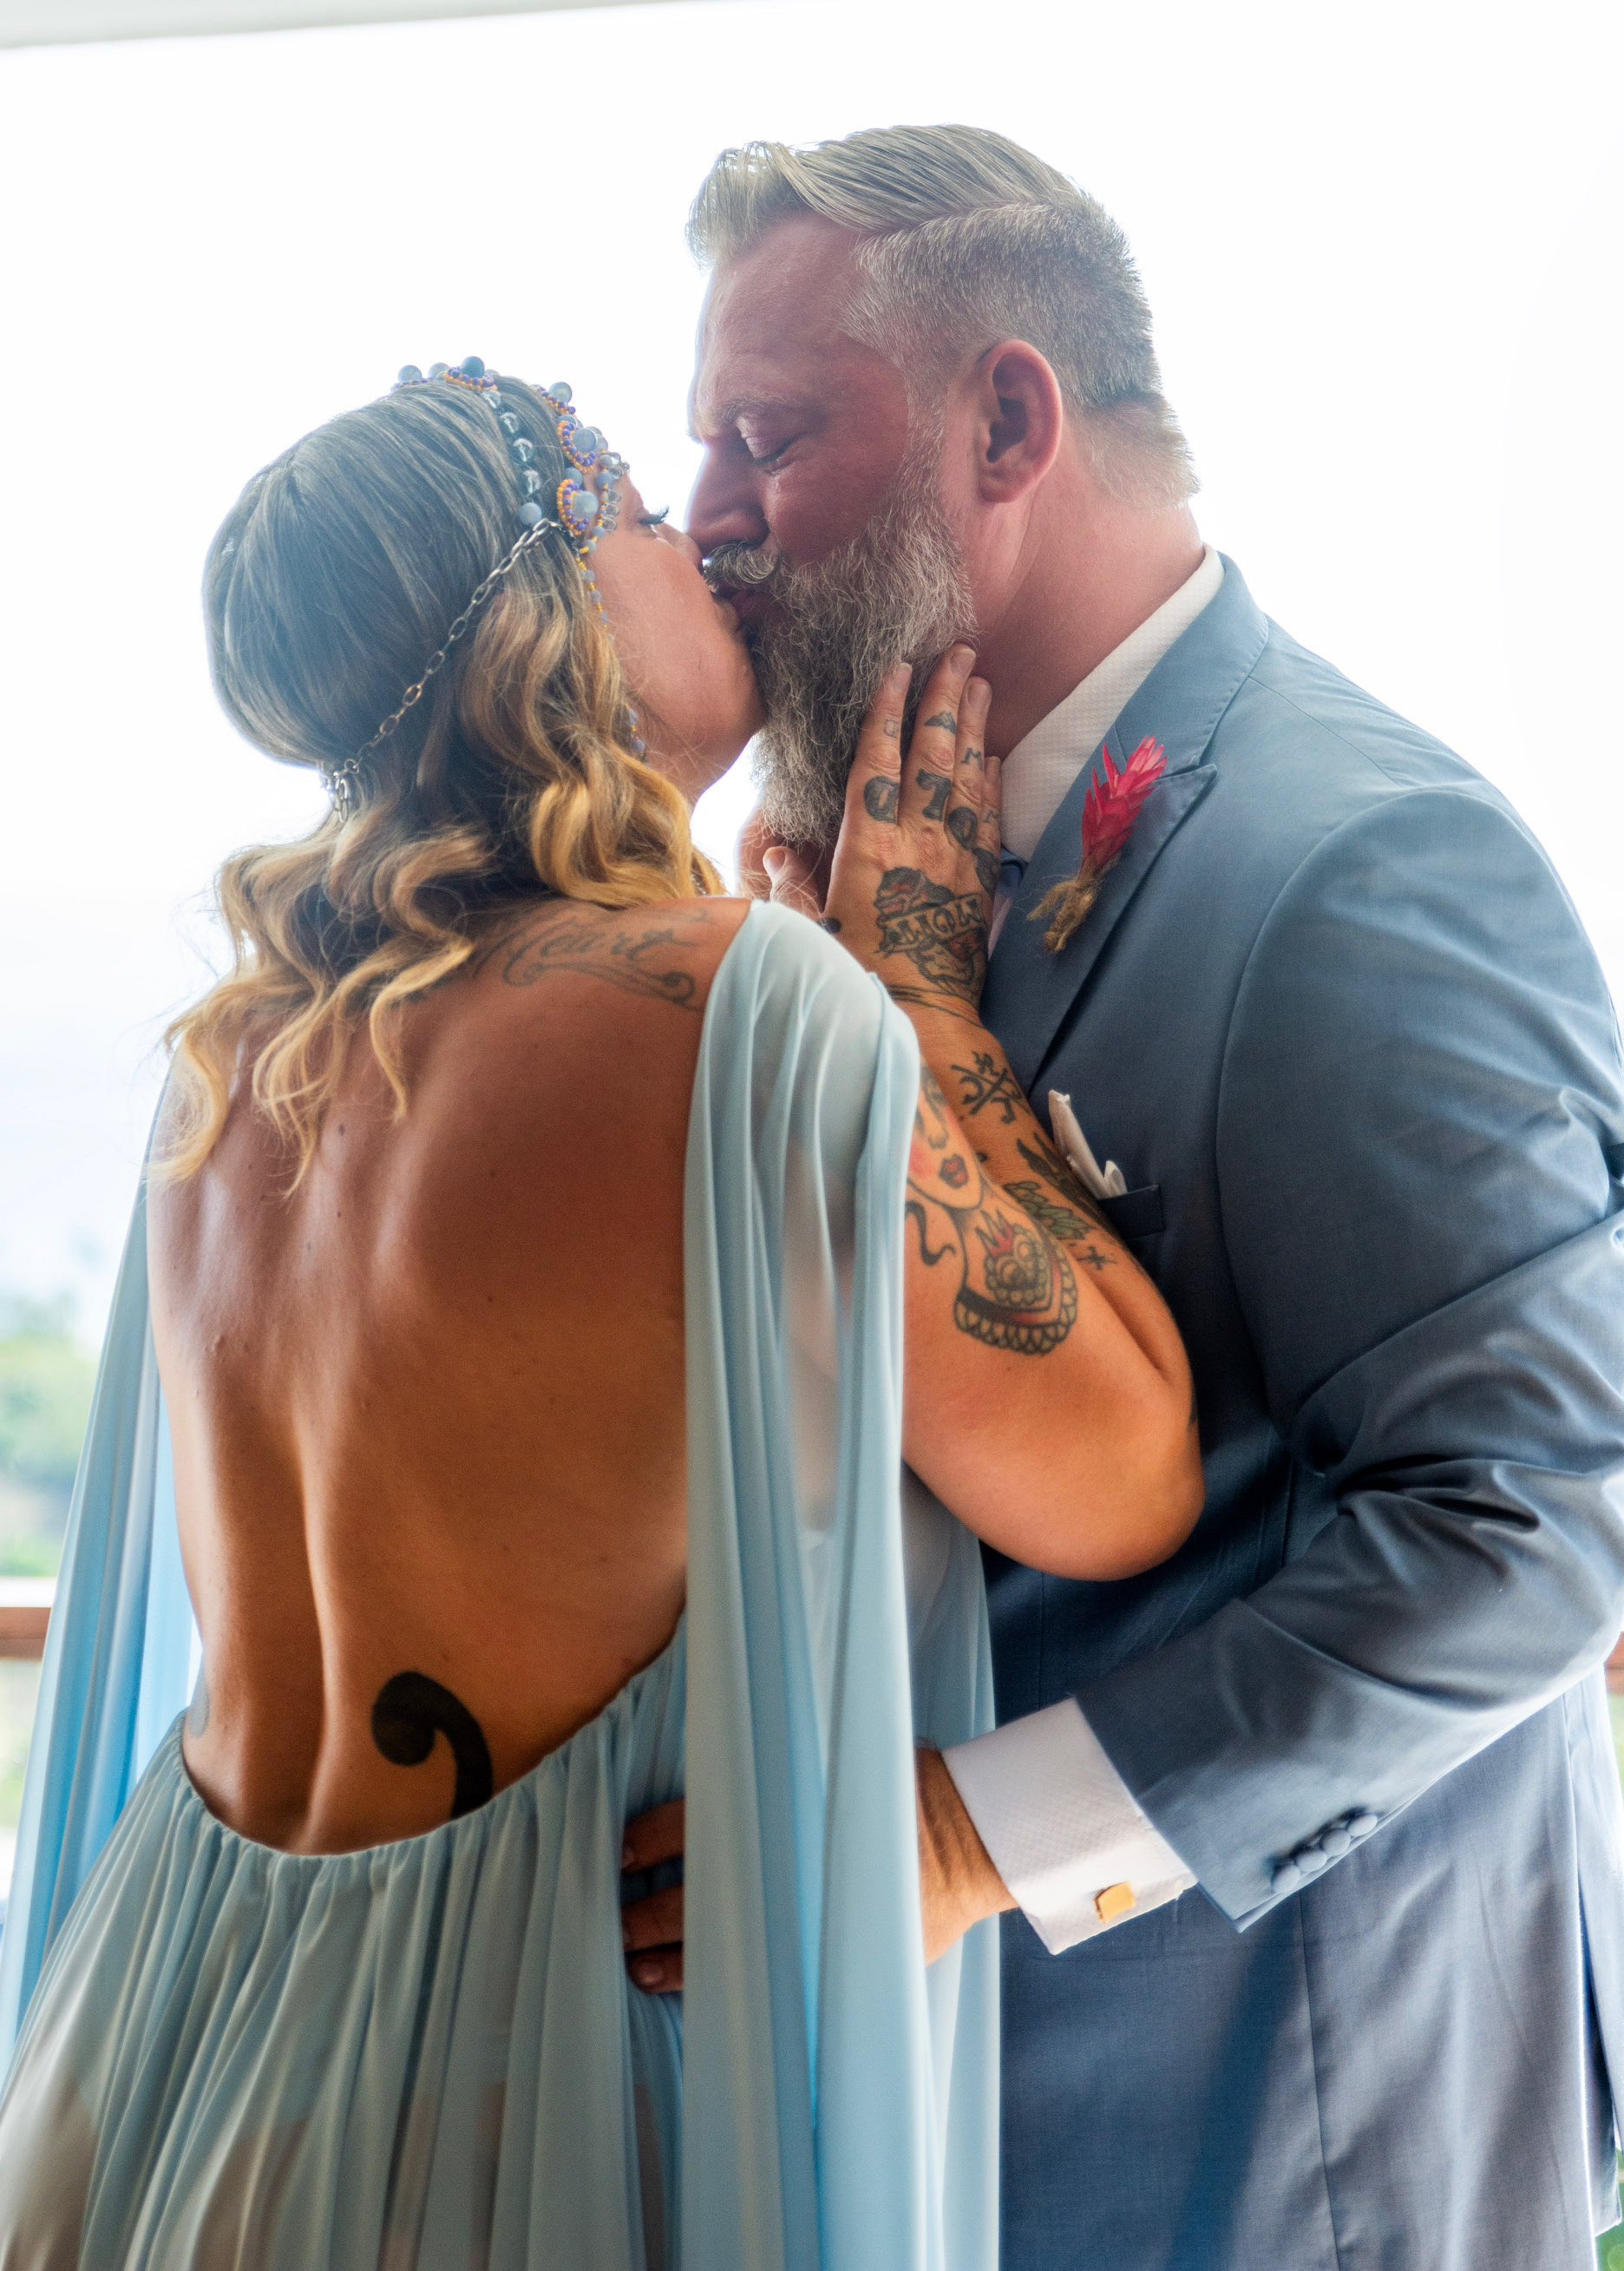 Danielle planted a kiss on Jeremy Scheuch on their wedding day